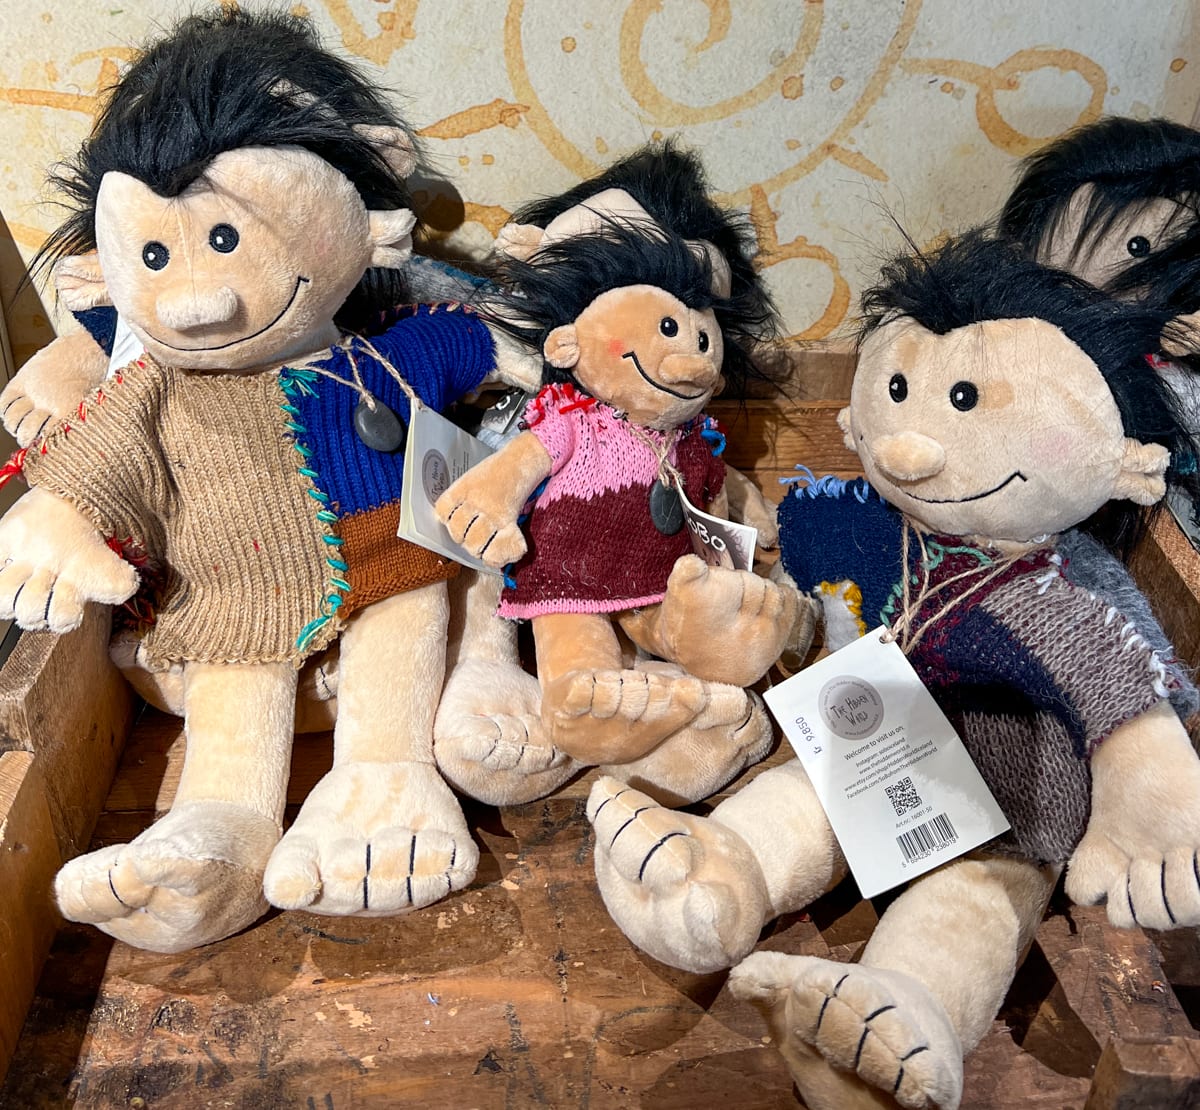 Stuffed troll dolls for sale in the FlyOver Iceland Shop 